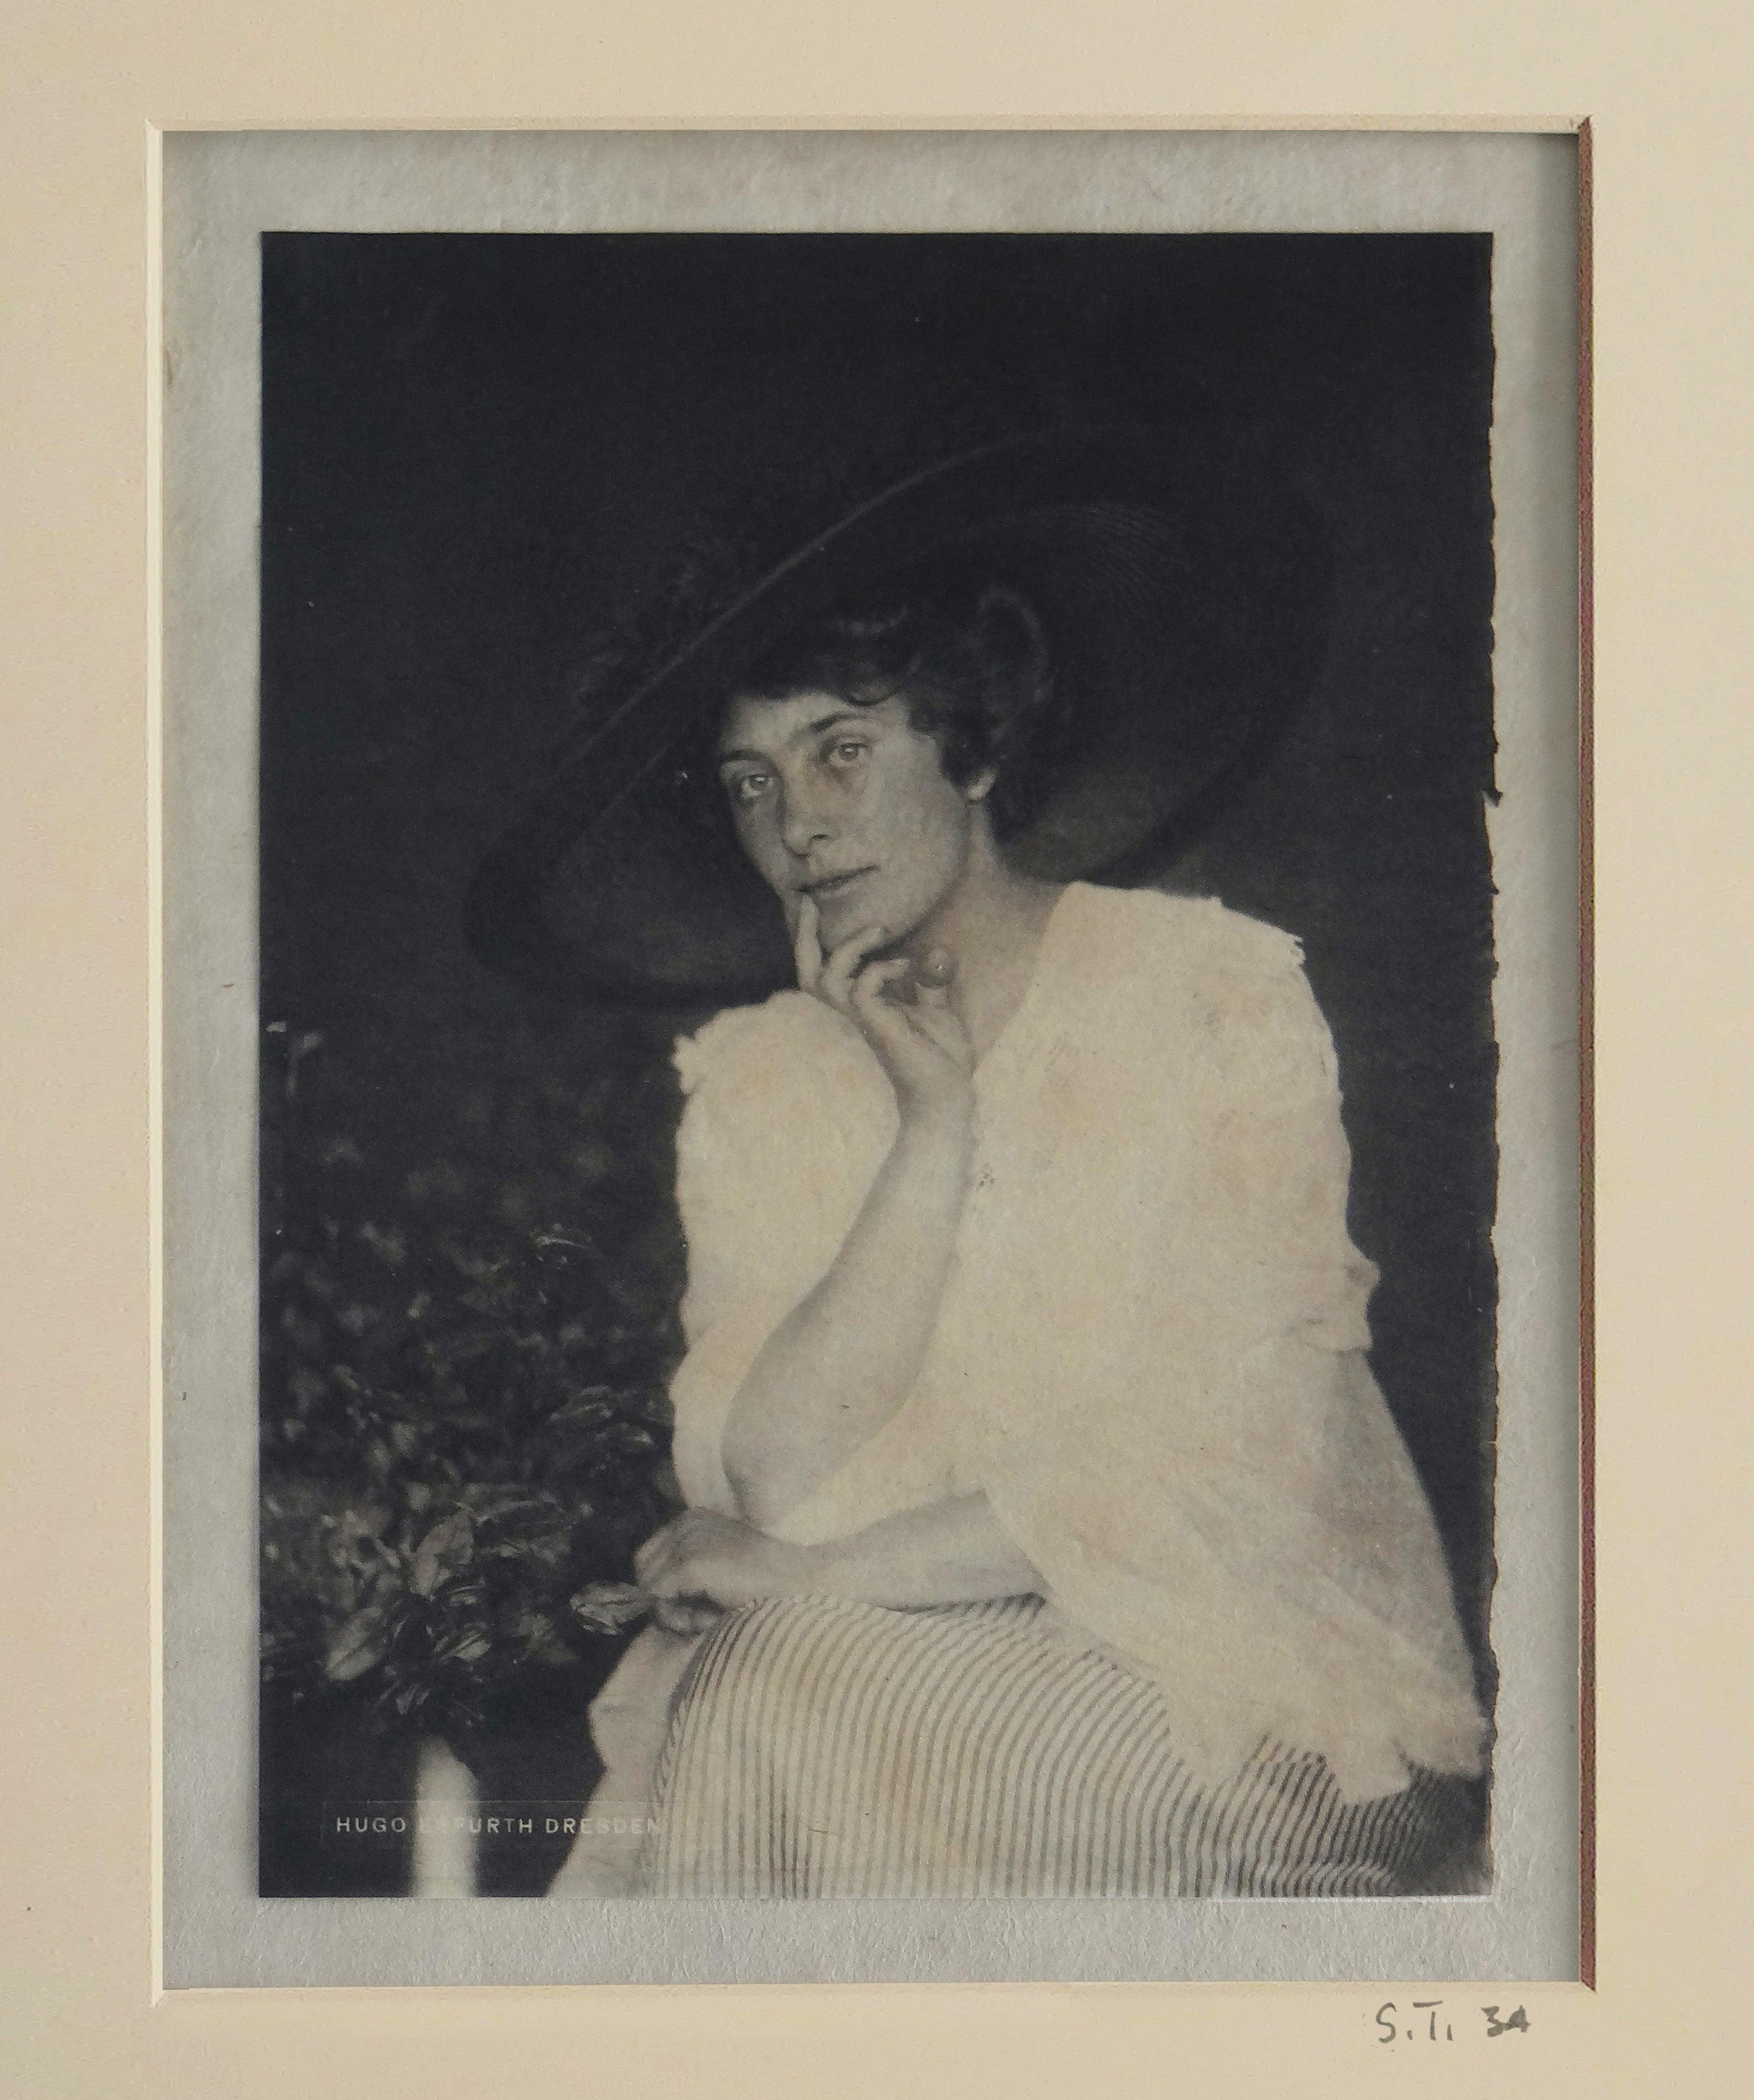 Portrait of a woman
Chicago 45 by Hugo Erfurth
Vintage Photography mounted on board 
1905-1910
Unframed
Image size: 8.75 in. H x 6.5 in. W
Sheet size: 14.38 in. H x 10.25 in. W
Signed, stamped, titled and dated lower left on paper in